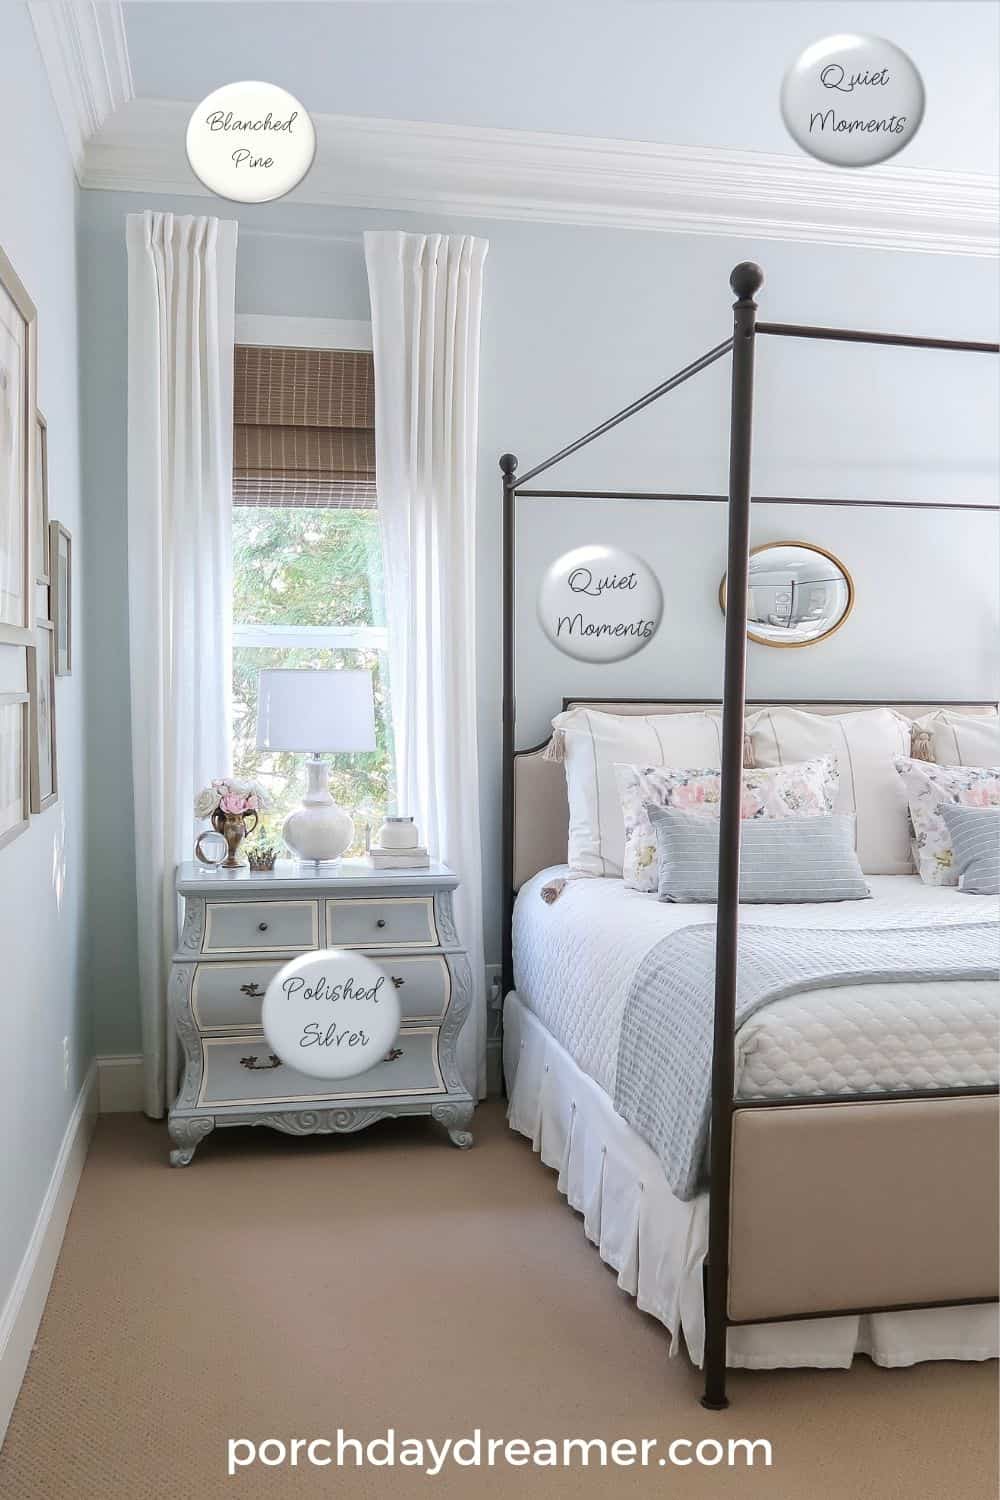 master-bedroom-benjamin-moore-quiet-moments-walls-valspar-polished-silver-furniture-whole-home-open-concept-paint-colors